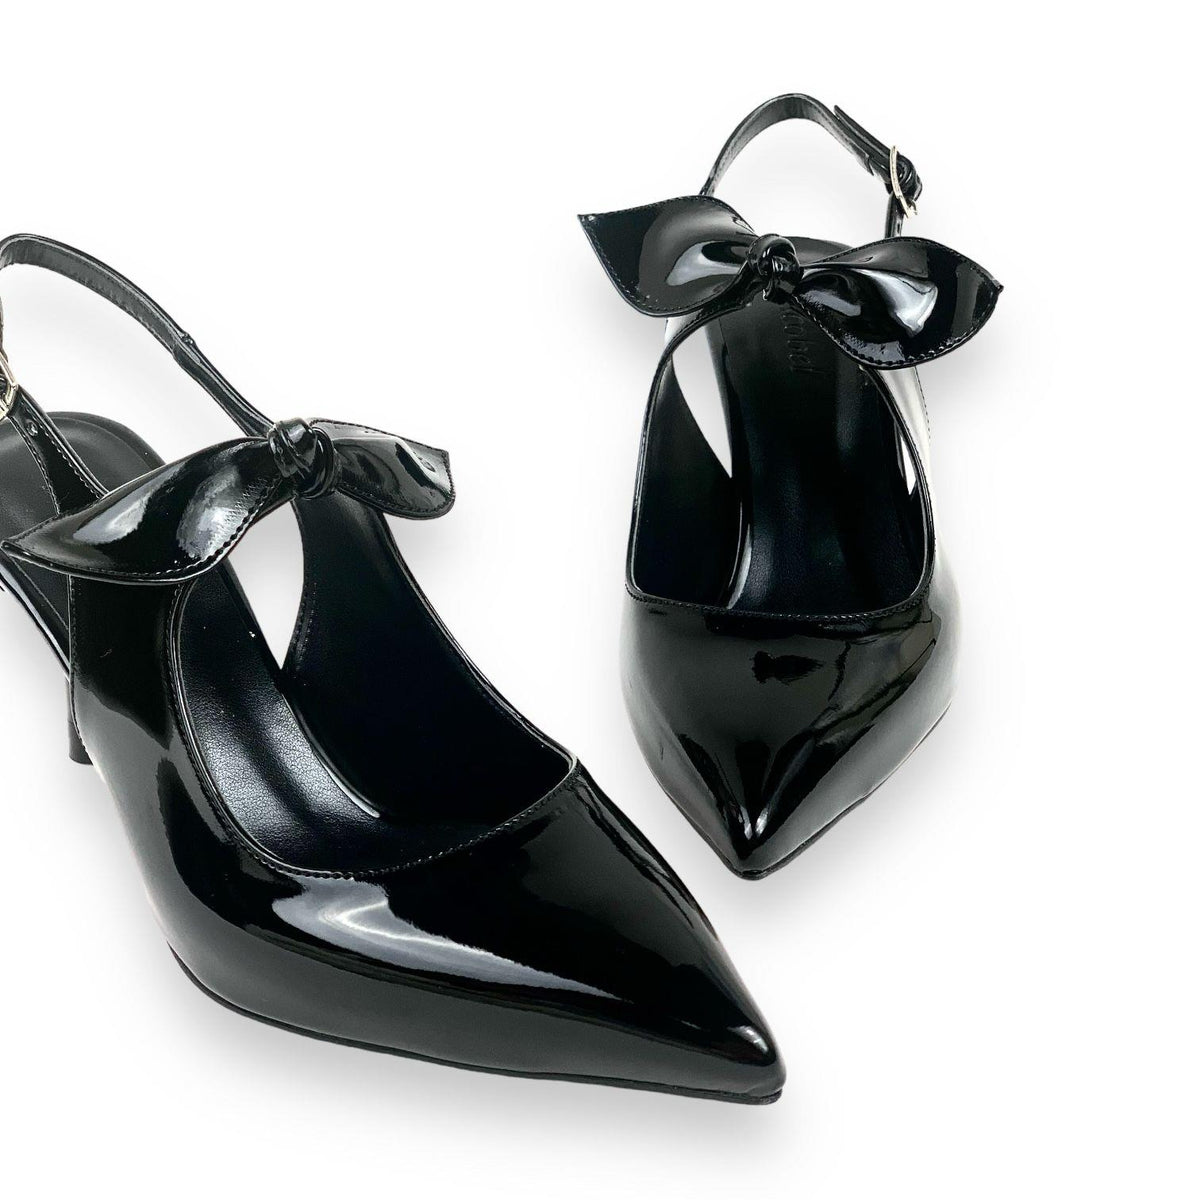 Women's Black Patent Leather Material Tanb Bow Detailed Heeled Pointed Toe Shoes 7 cm Heel - STREETMODE™